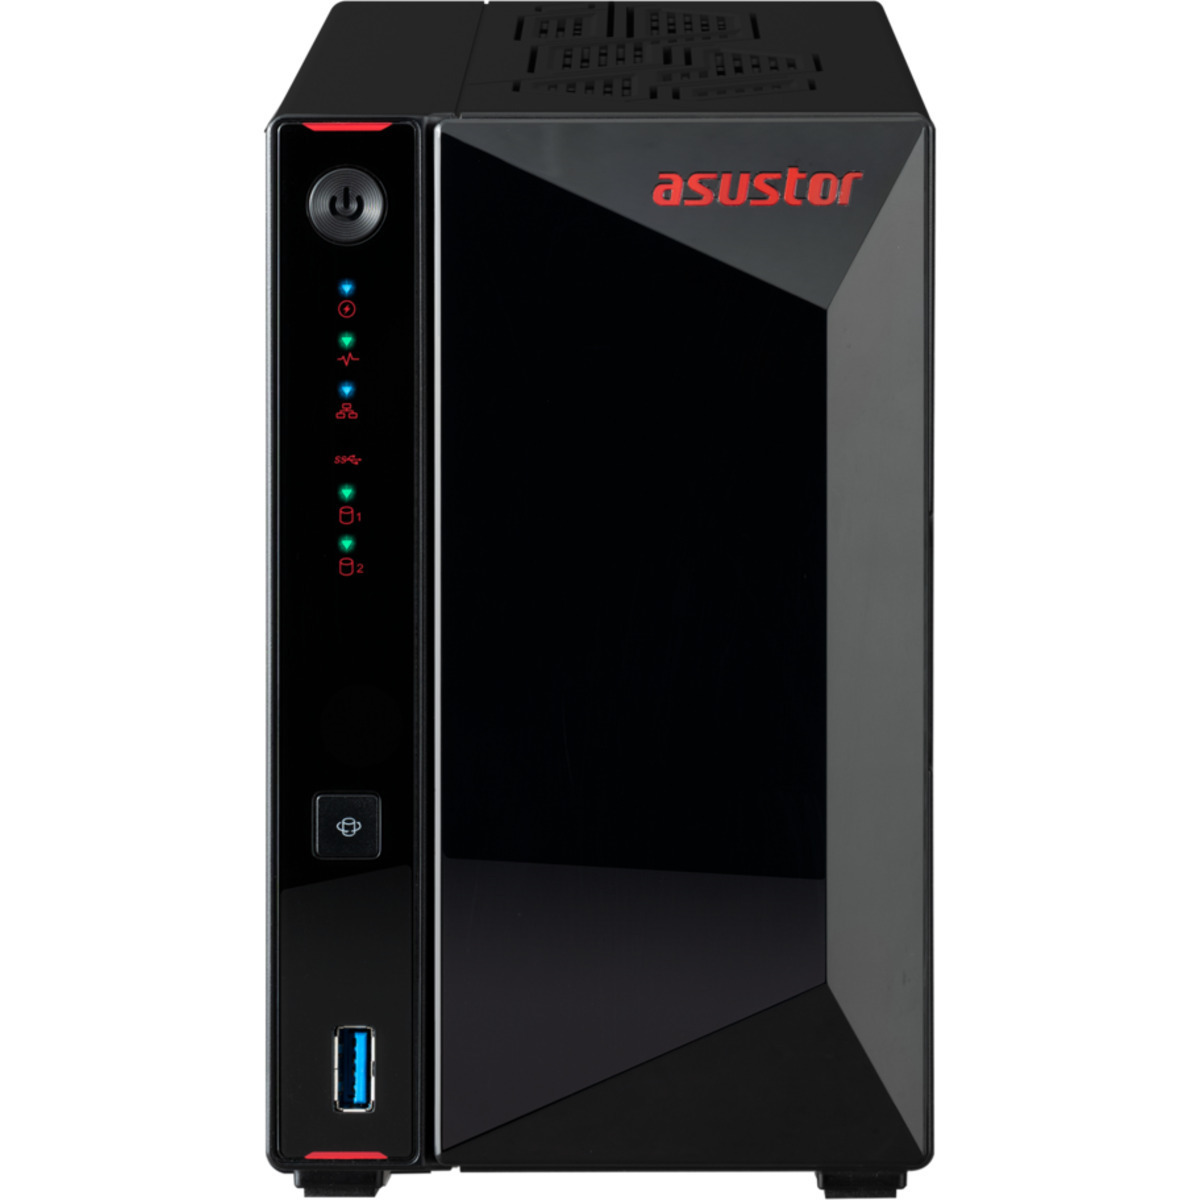 buy $1544 ASUSTOR Nimbustor 2 Gen2 AS5402T 44tb Desktop NAS - Network Attached Storage Device 2x22000gb Seagate IronWolf Pro ST22000NT001 3.5 7200rpm SATA 6Gb/s HDD NAS Class Drives Installed - Burn-In Tested - FREE RAM UPGRADE - nas headquarters buy network attached storage server device das new raid-5 free shipping simply usa Nimbustor 2 Gen2 AS5402T